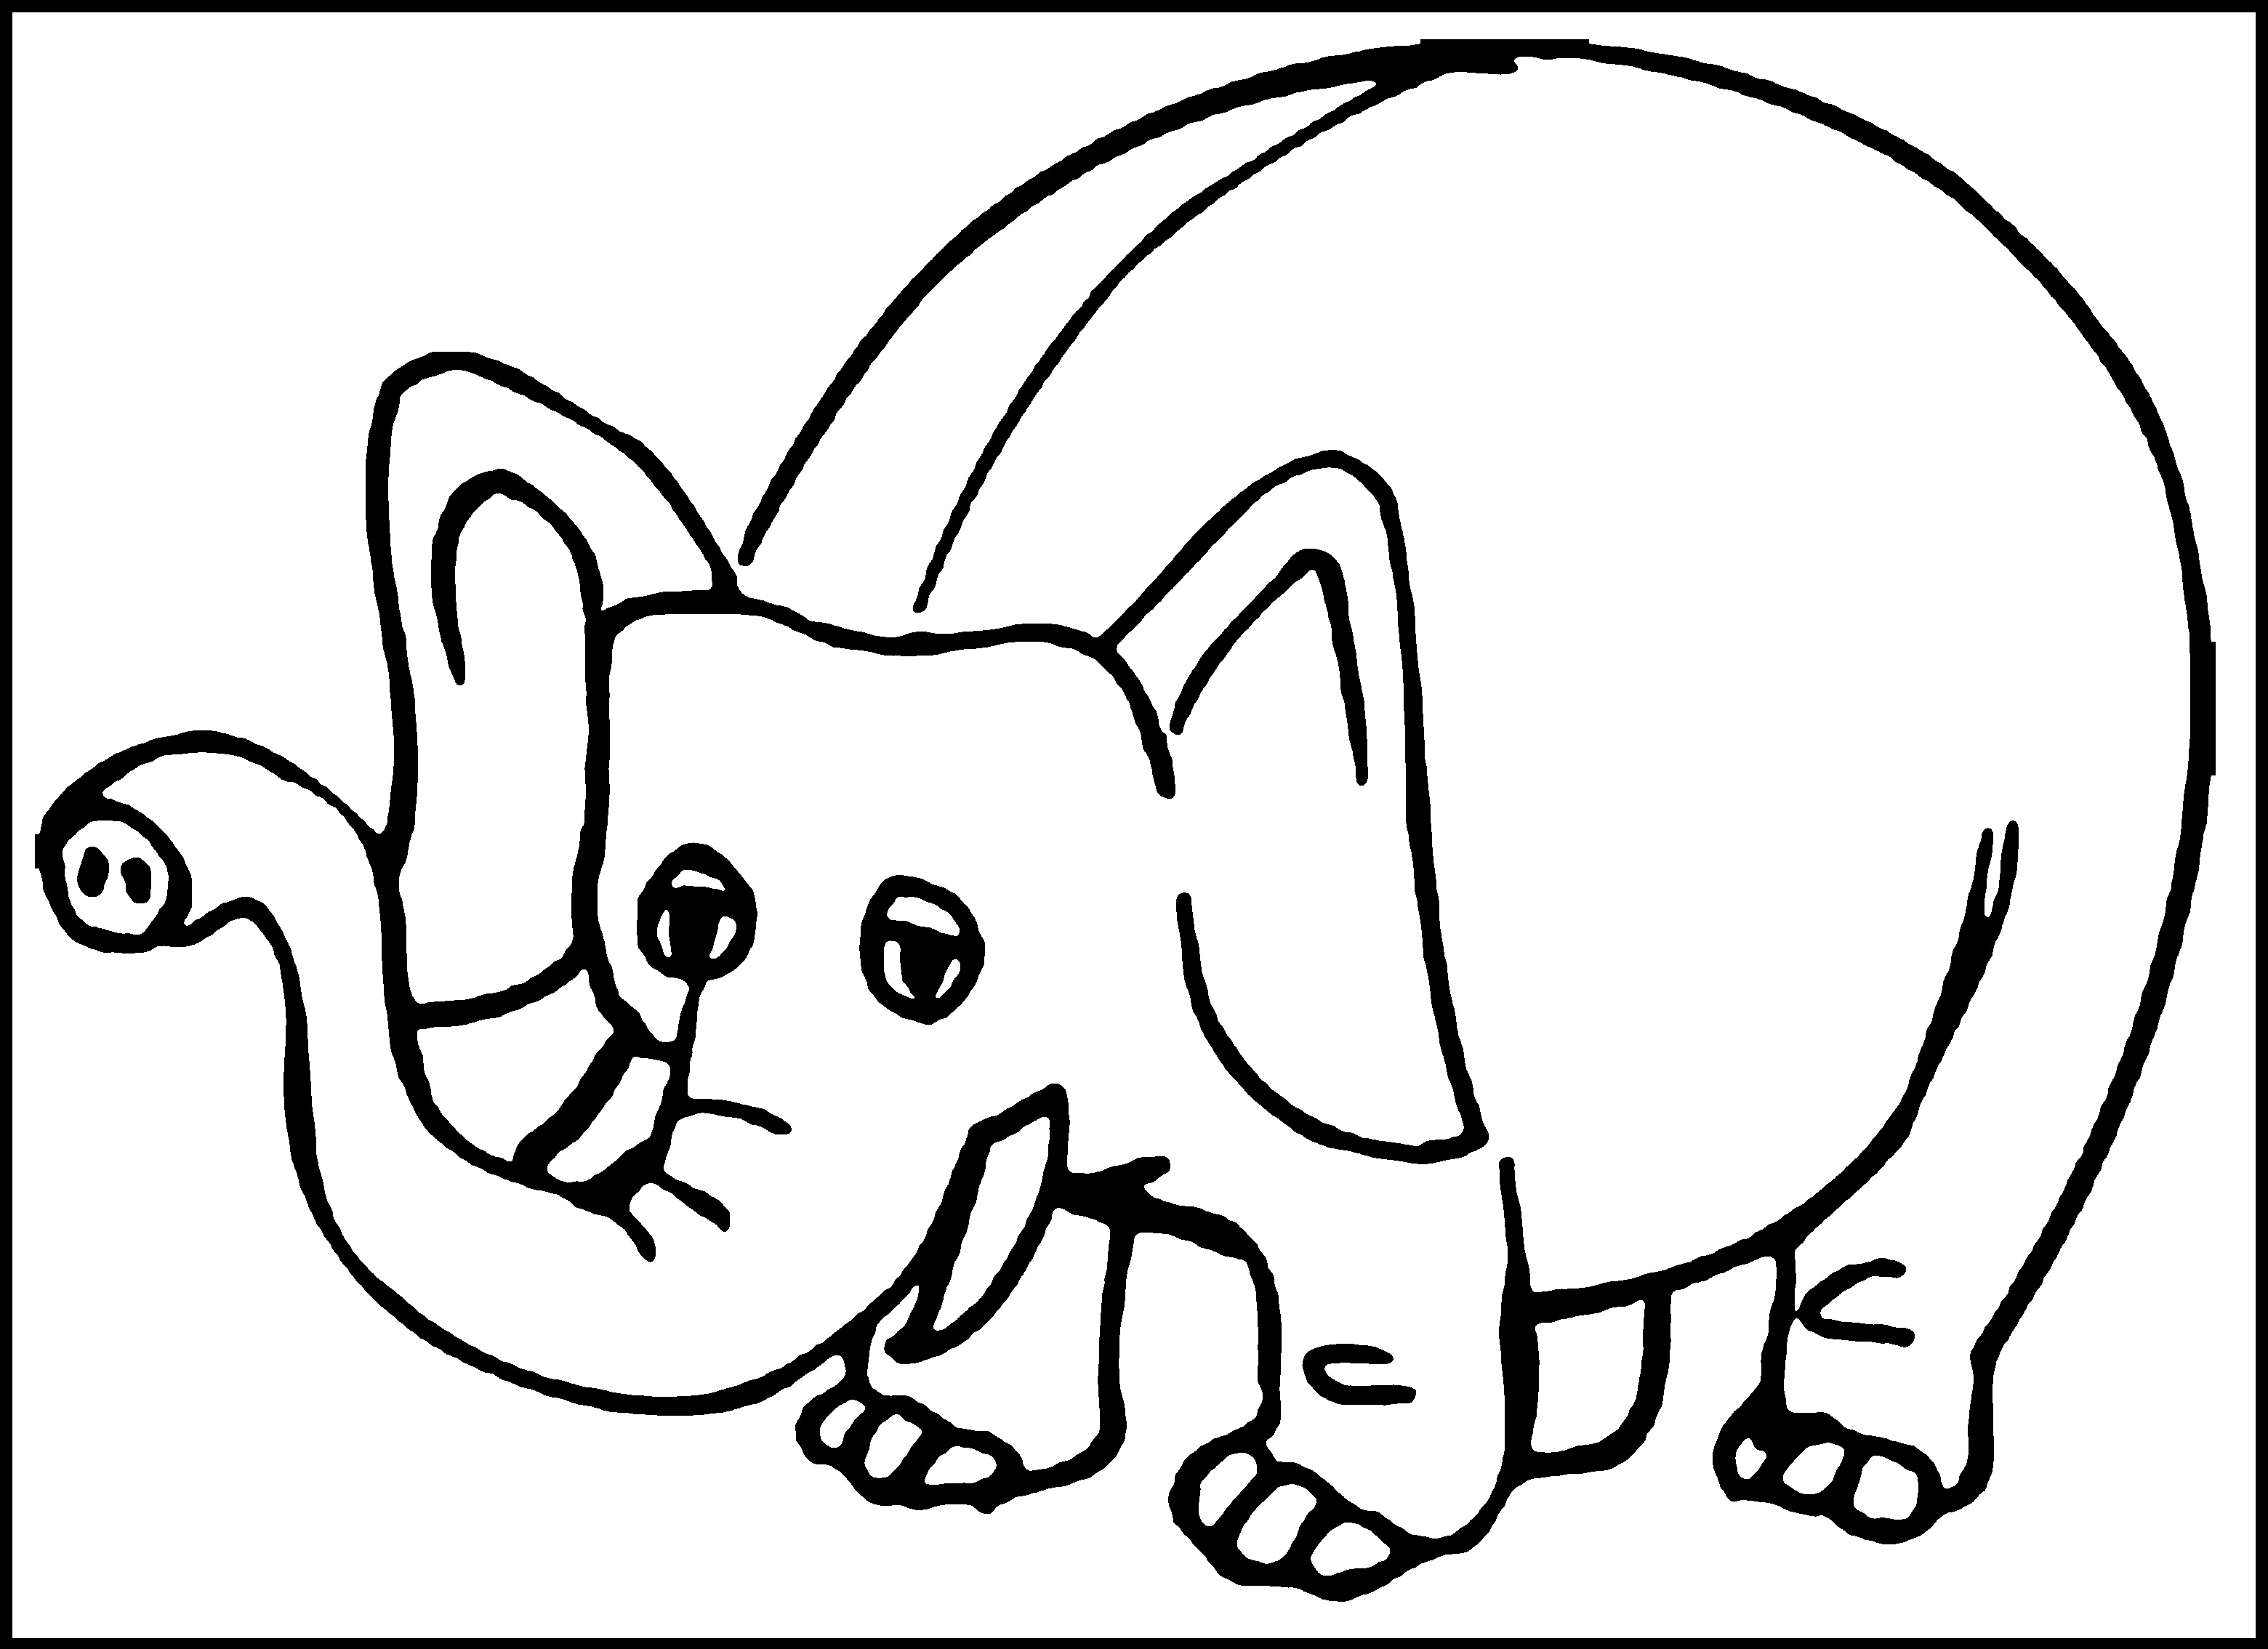 Free Printable Elephant Coloring Pages For Kids - Animal Place